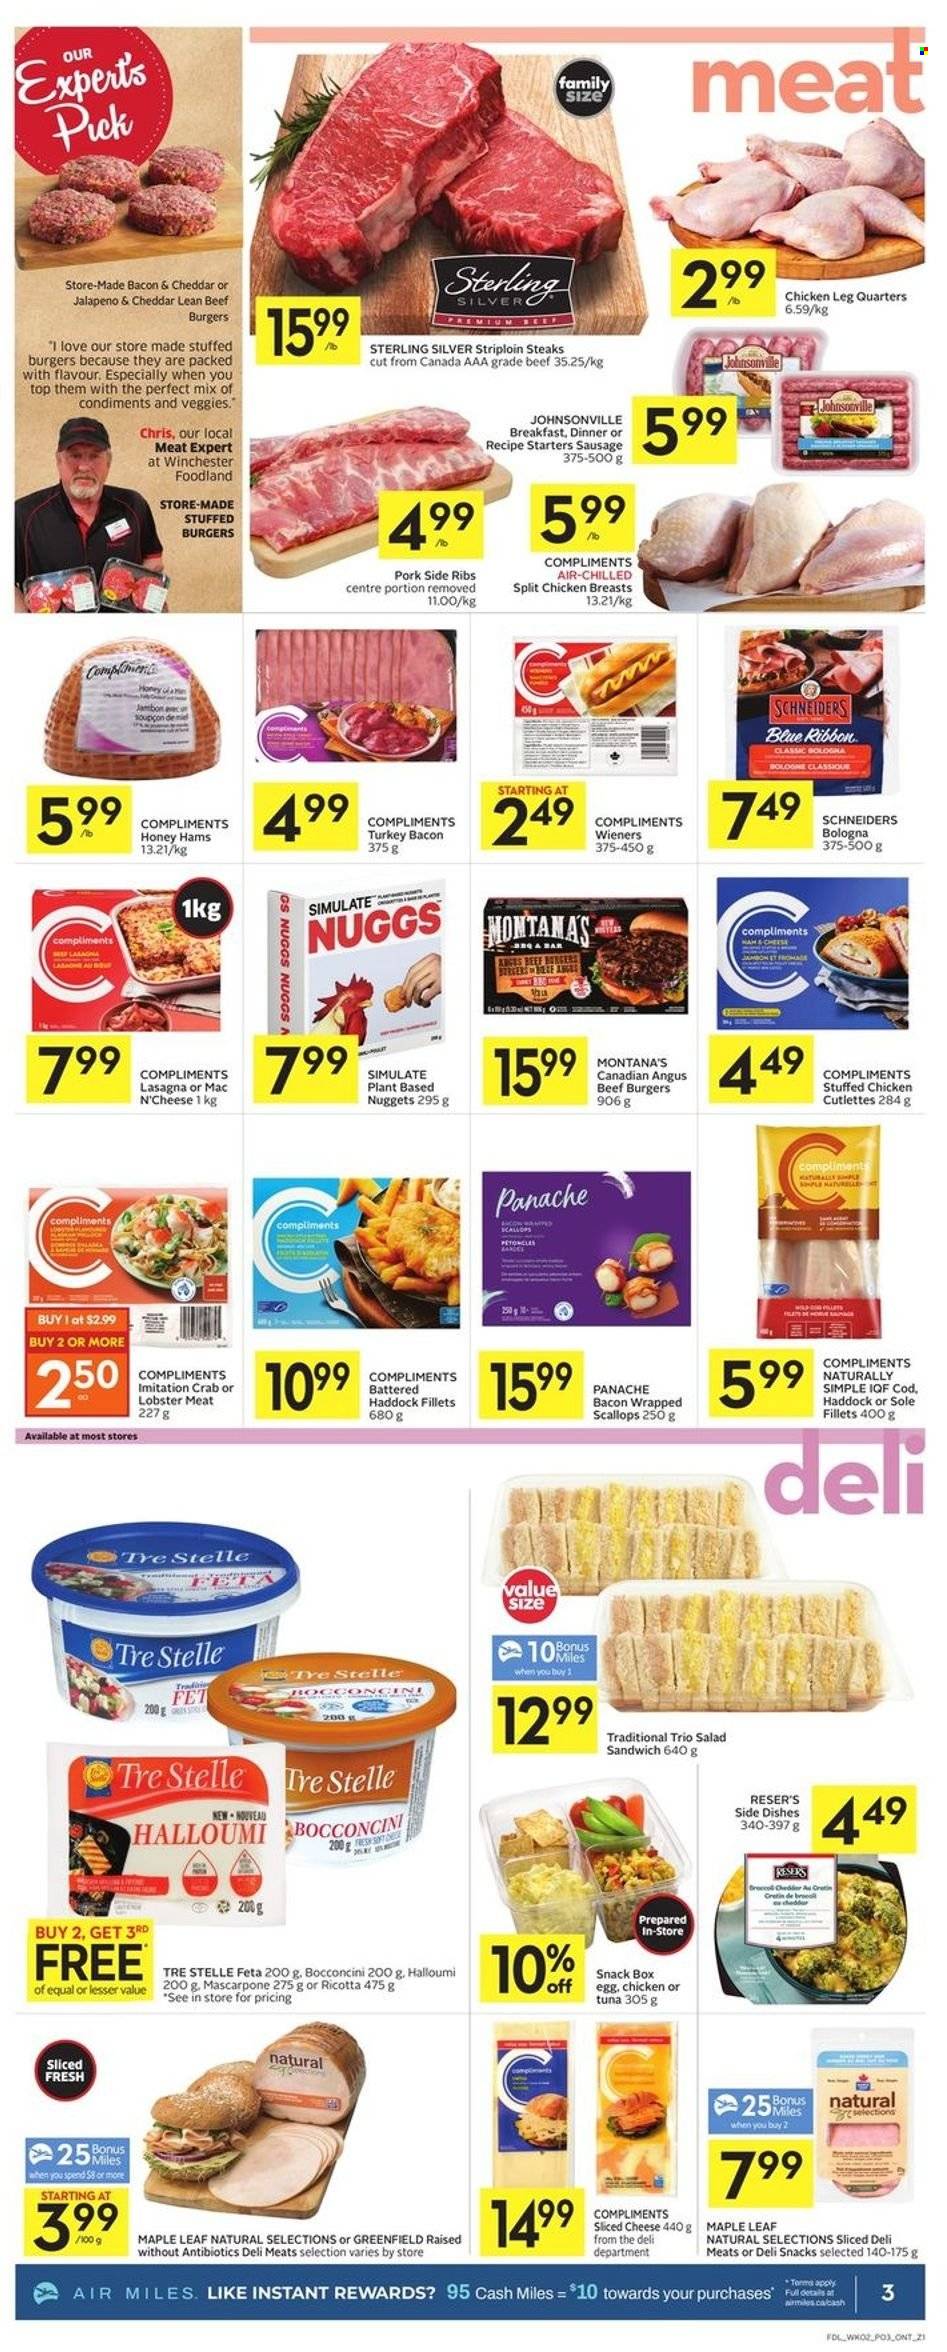 thumbnail - Foodland Flyer - May 12, 2022 - May 18, 2022 - Sales products - Blue Ribbon, bacon wrapped scallops, cod, lobster, scallops, tuna, haddock, crab, nuggets, hamburger, beef burger, lasagna meal, stuffed chicken, bacon, turkey bacon, bologna sausage, Johnsonville, sausage, bocconcini, sliced cheese, halloumi, cheese, feta, eggs, snack, honey, chicken breasts, chicken legs, beef meat, striploin steak, mascarpone, ricotta, steak. Page 3.